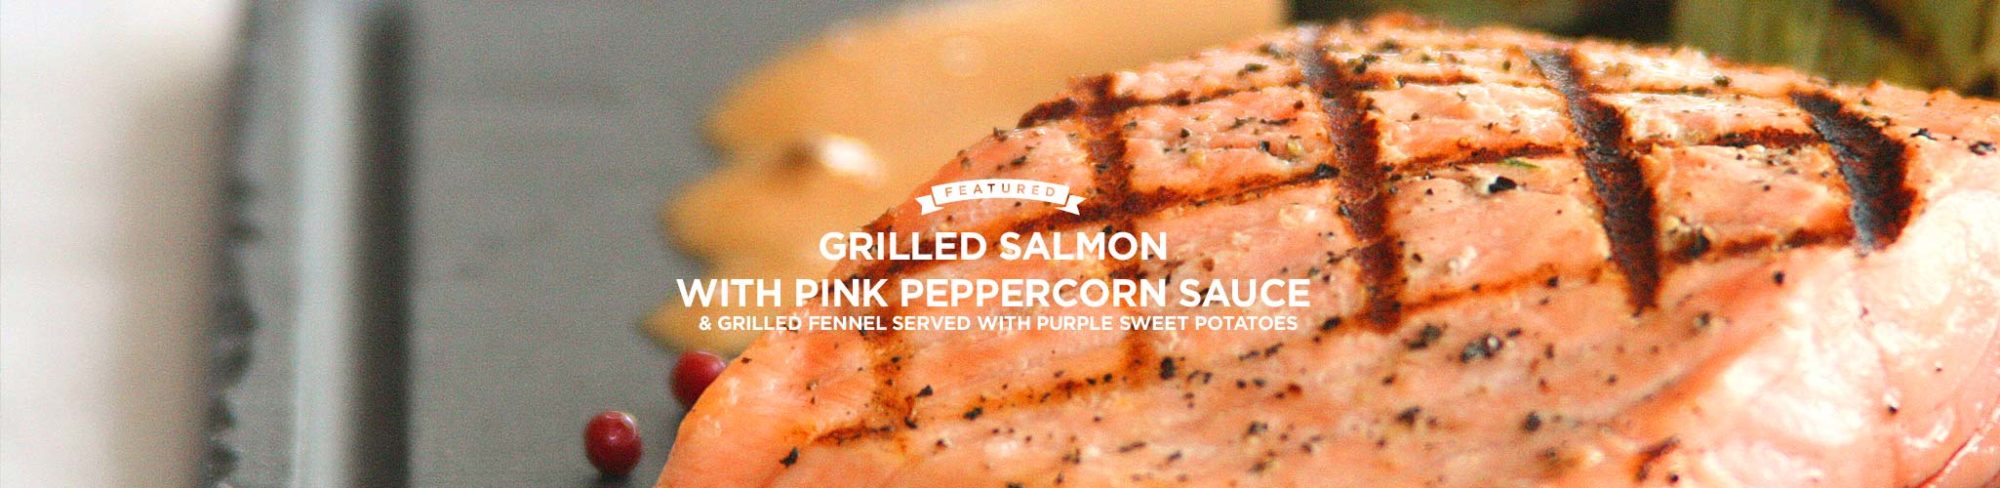 Grilled Salmon with Pink Peppercorn Sauce at Krave